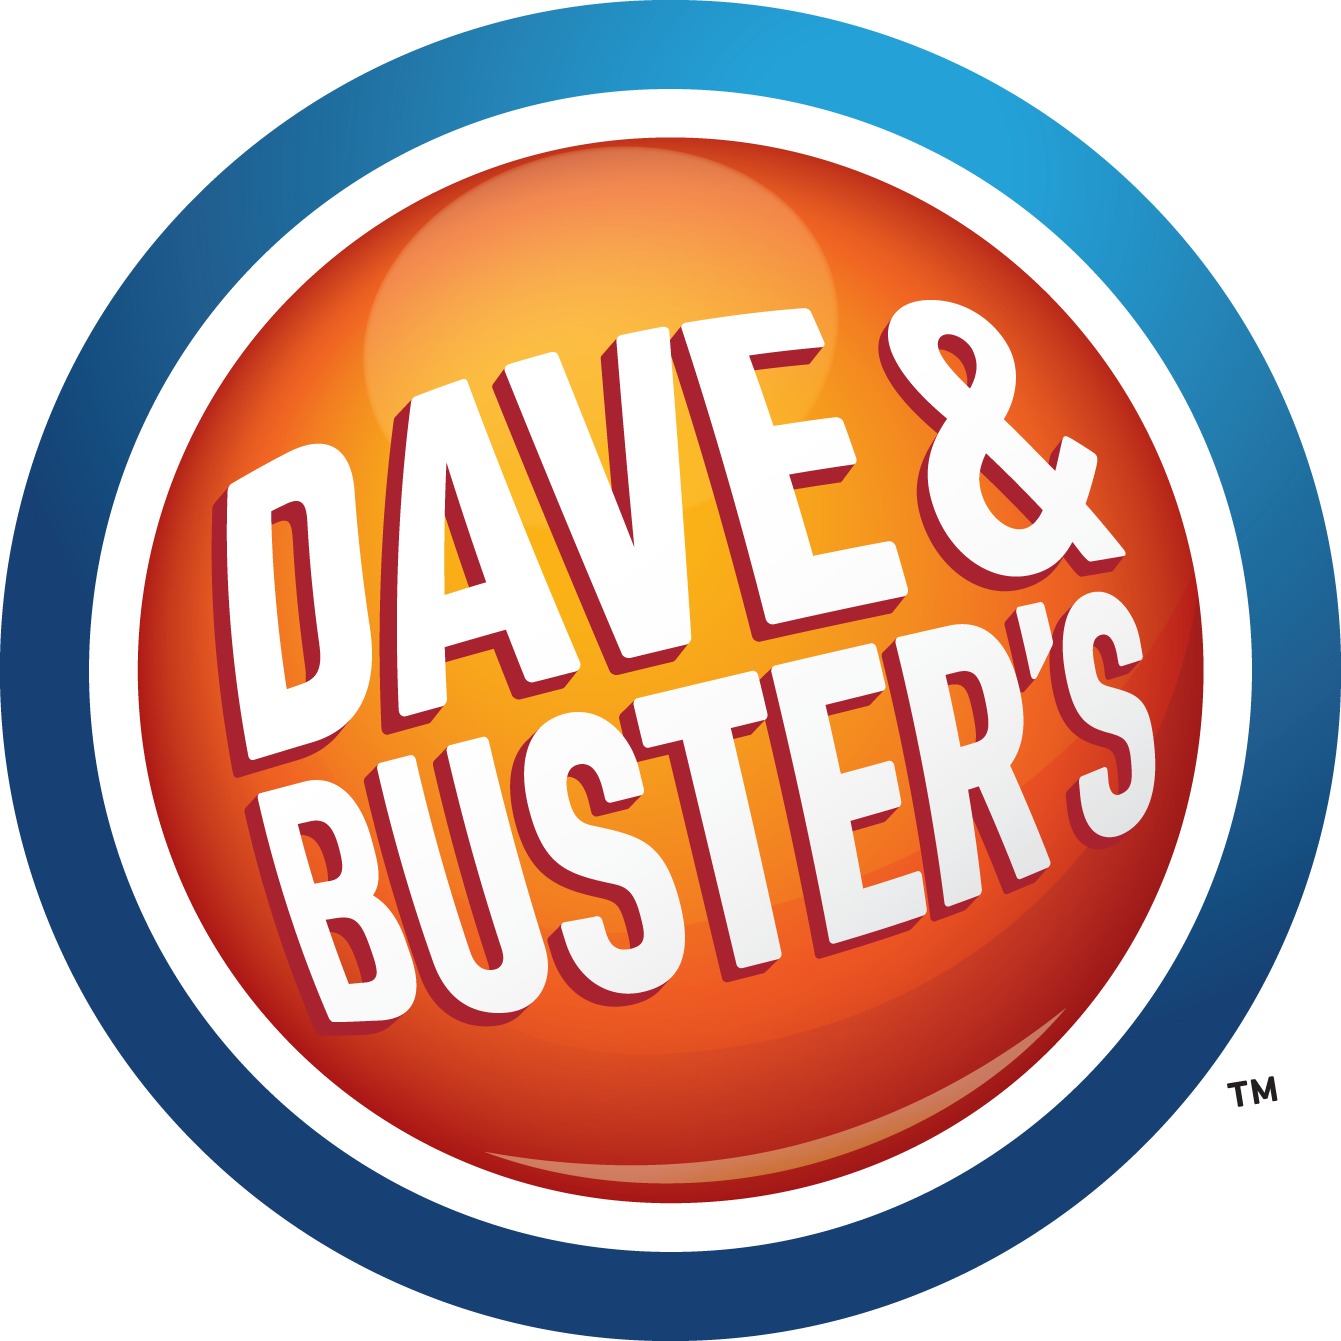 Dave & Buster’s Opening